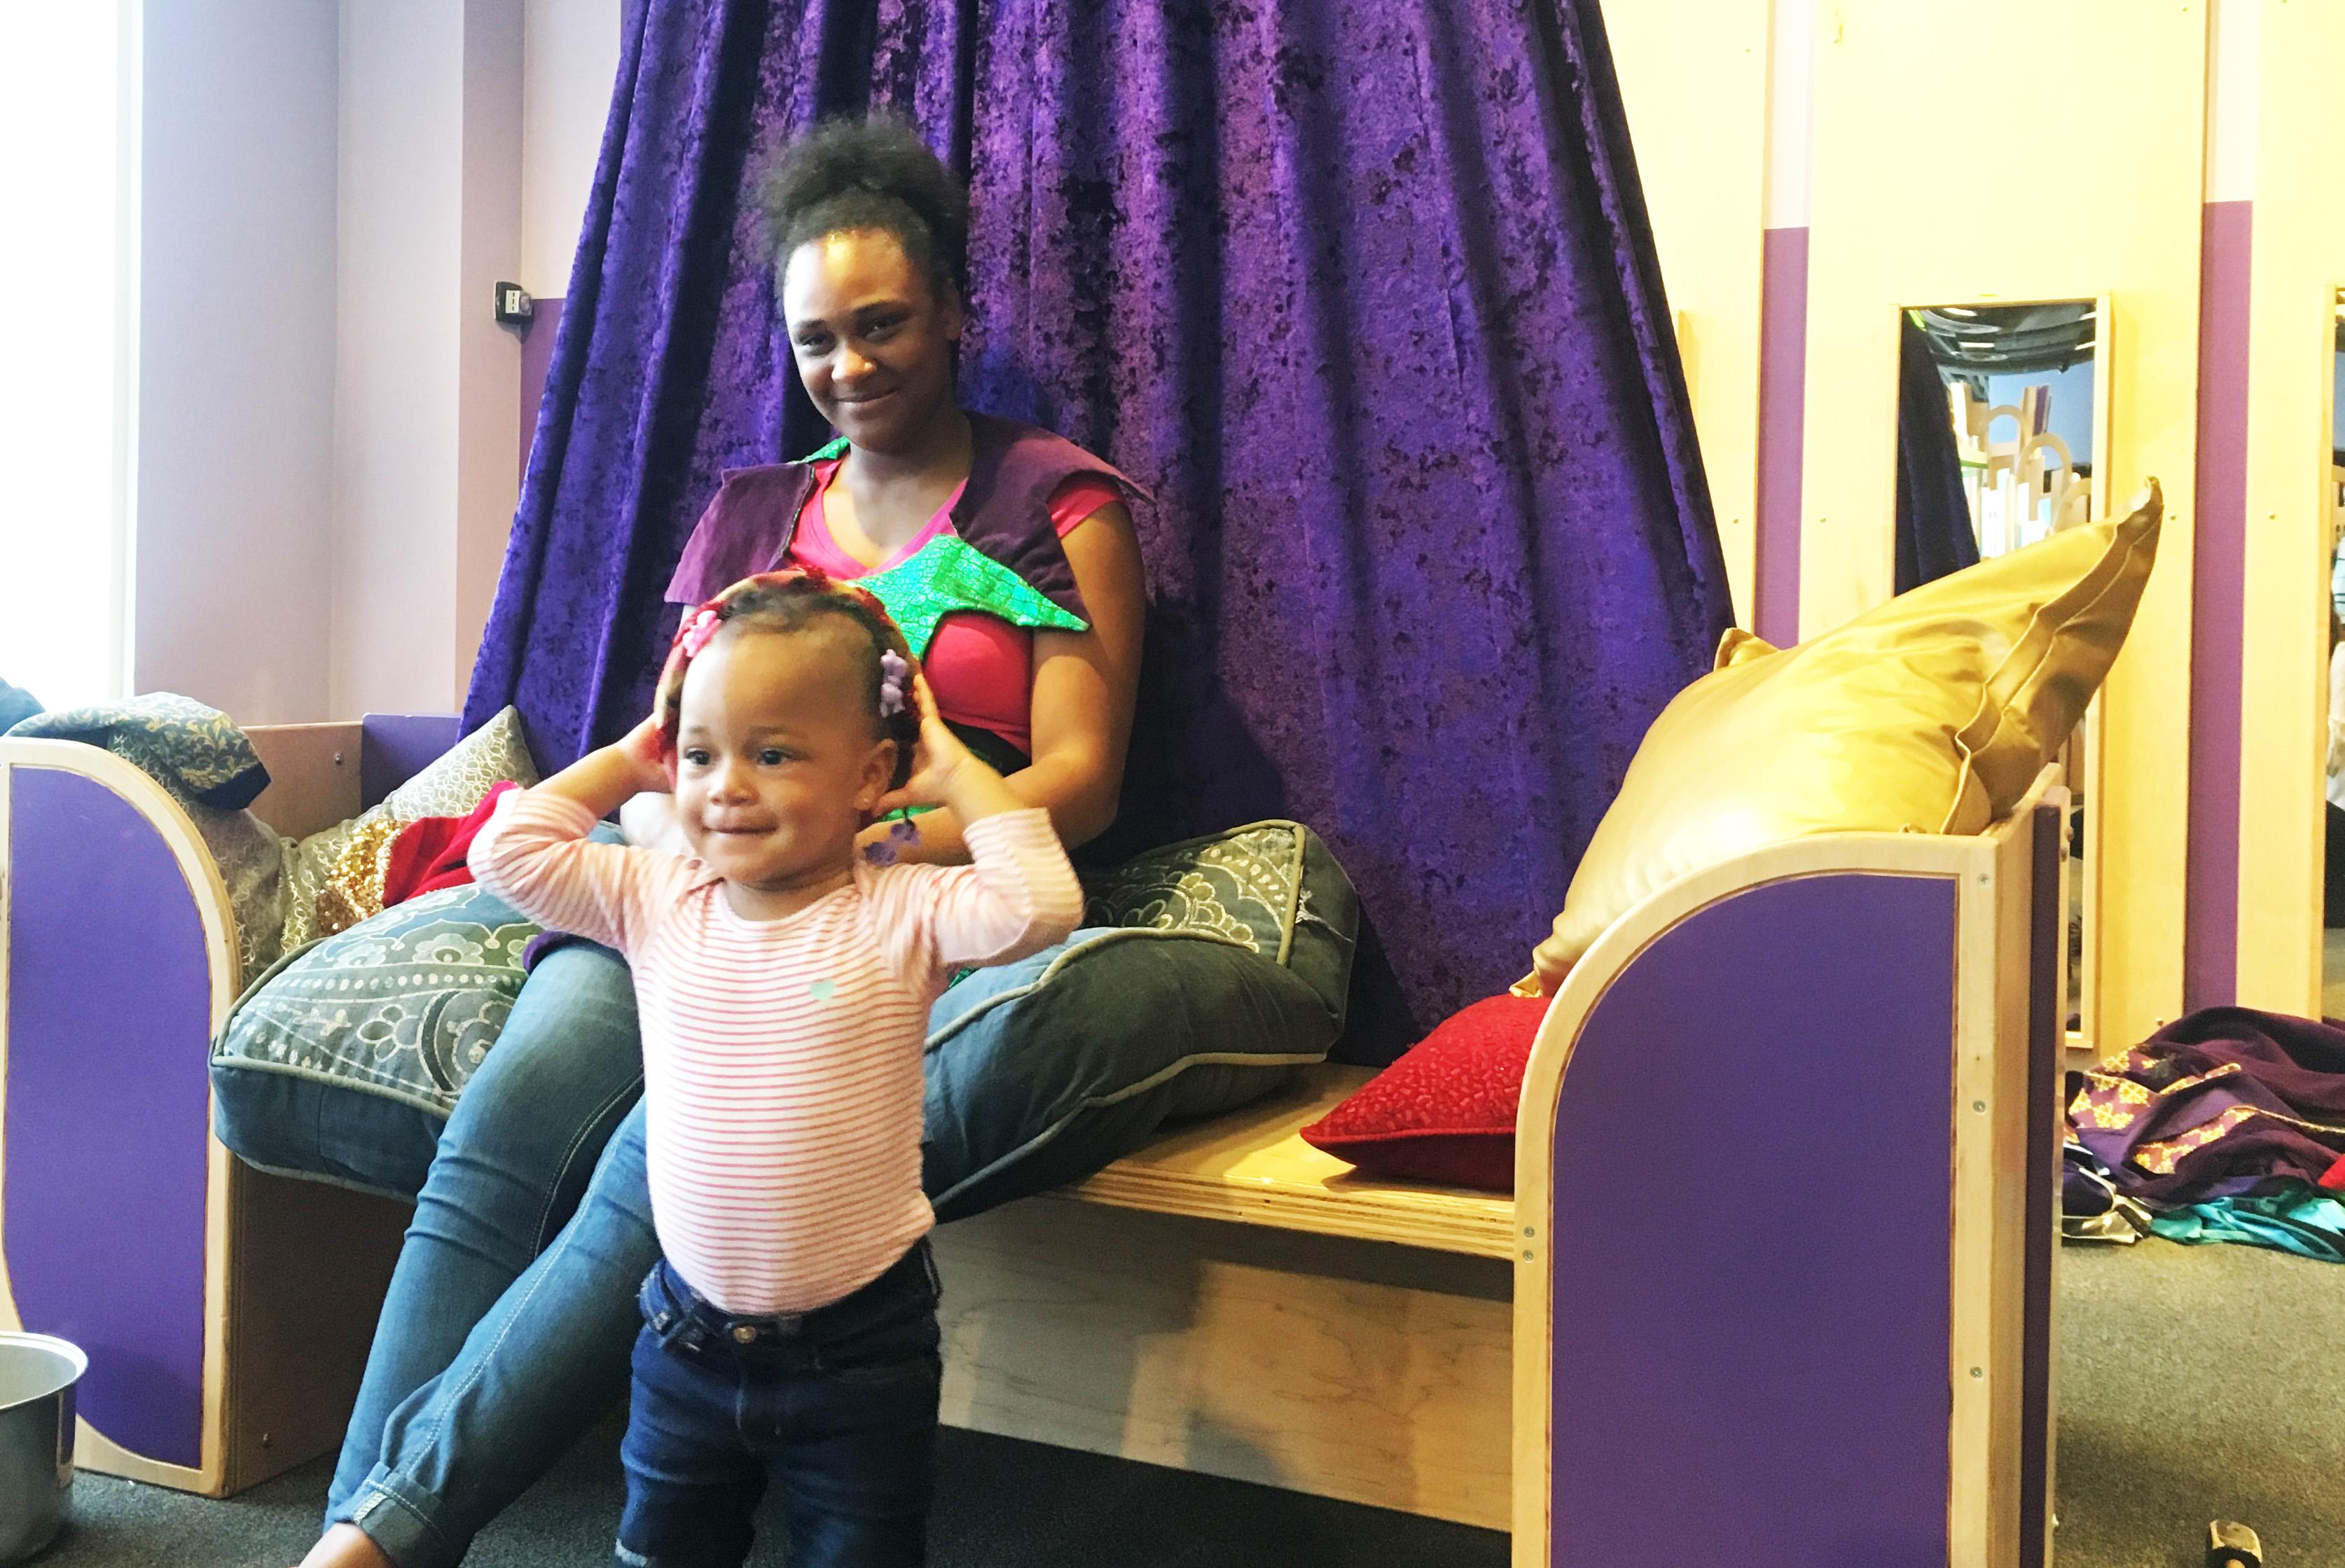 Keyana Hopkins, 18, watches her 1-year-old daughter play dress-up at the Chicago Children's Museum “Once Upon a Castle” exhibit. (Maya Miller / Chicago Tonight)